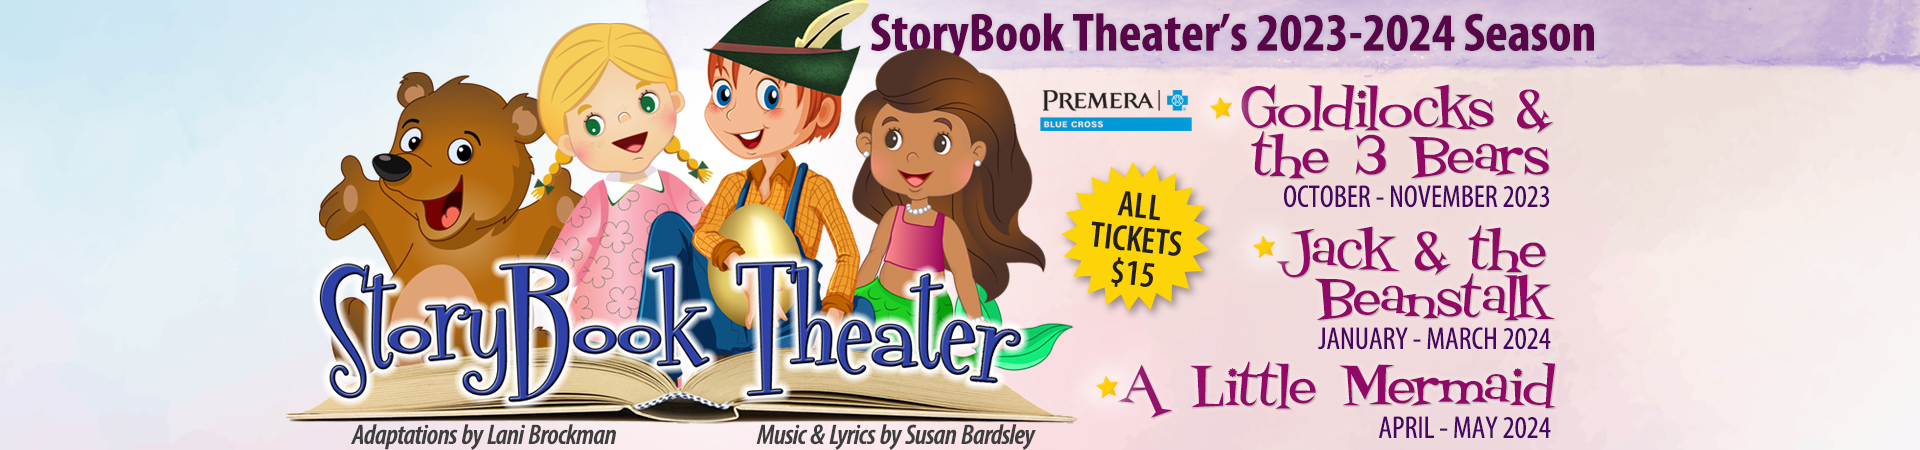 StoryBook Theater 2023-24